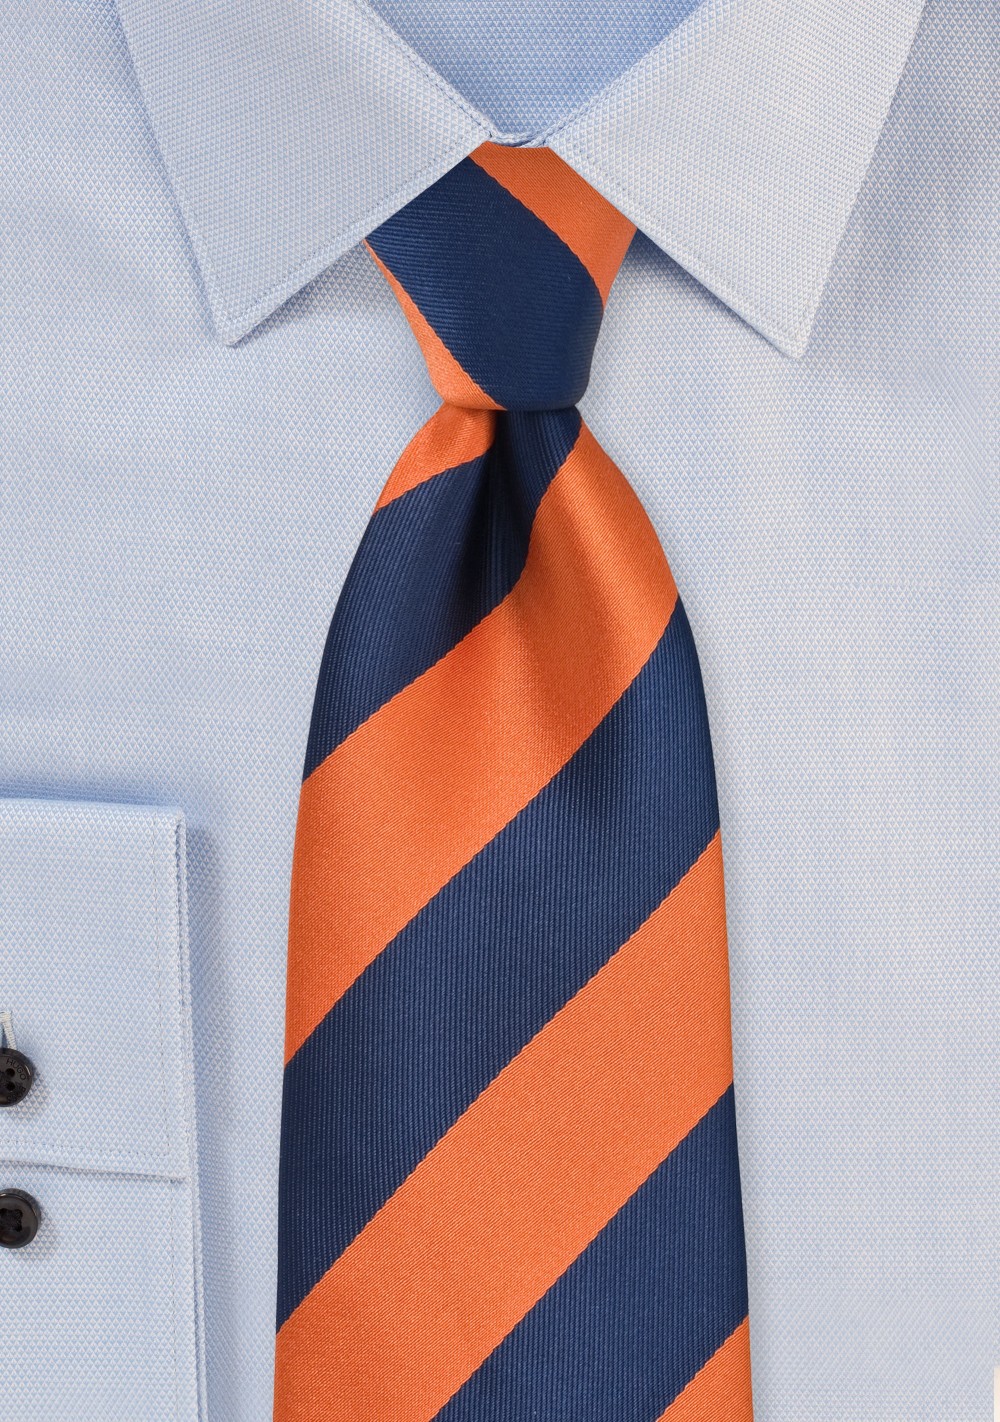 Wide Striped Tie in Orange and Navy